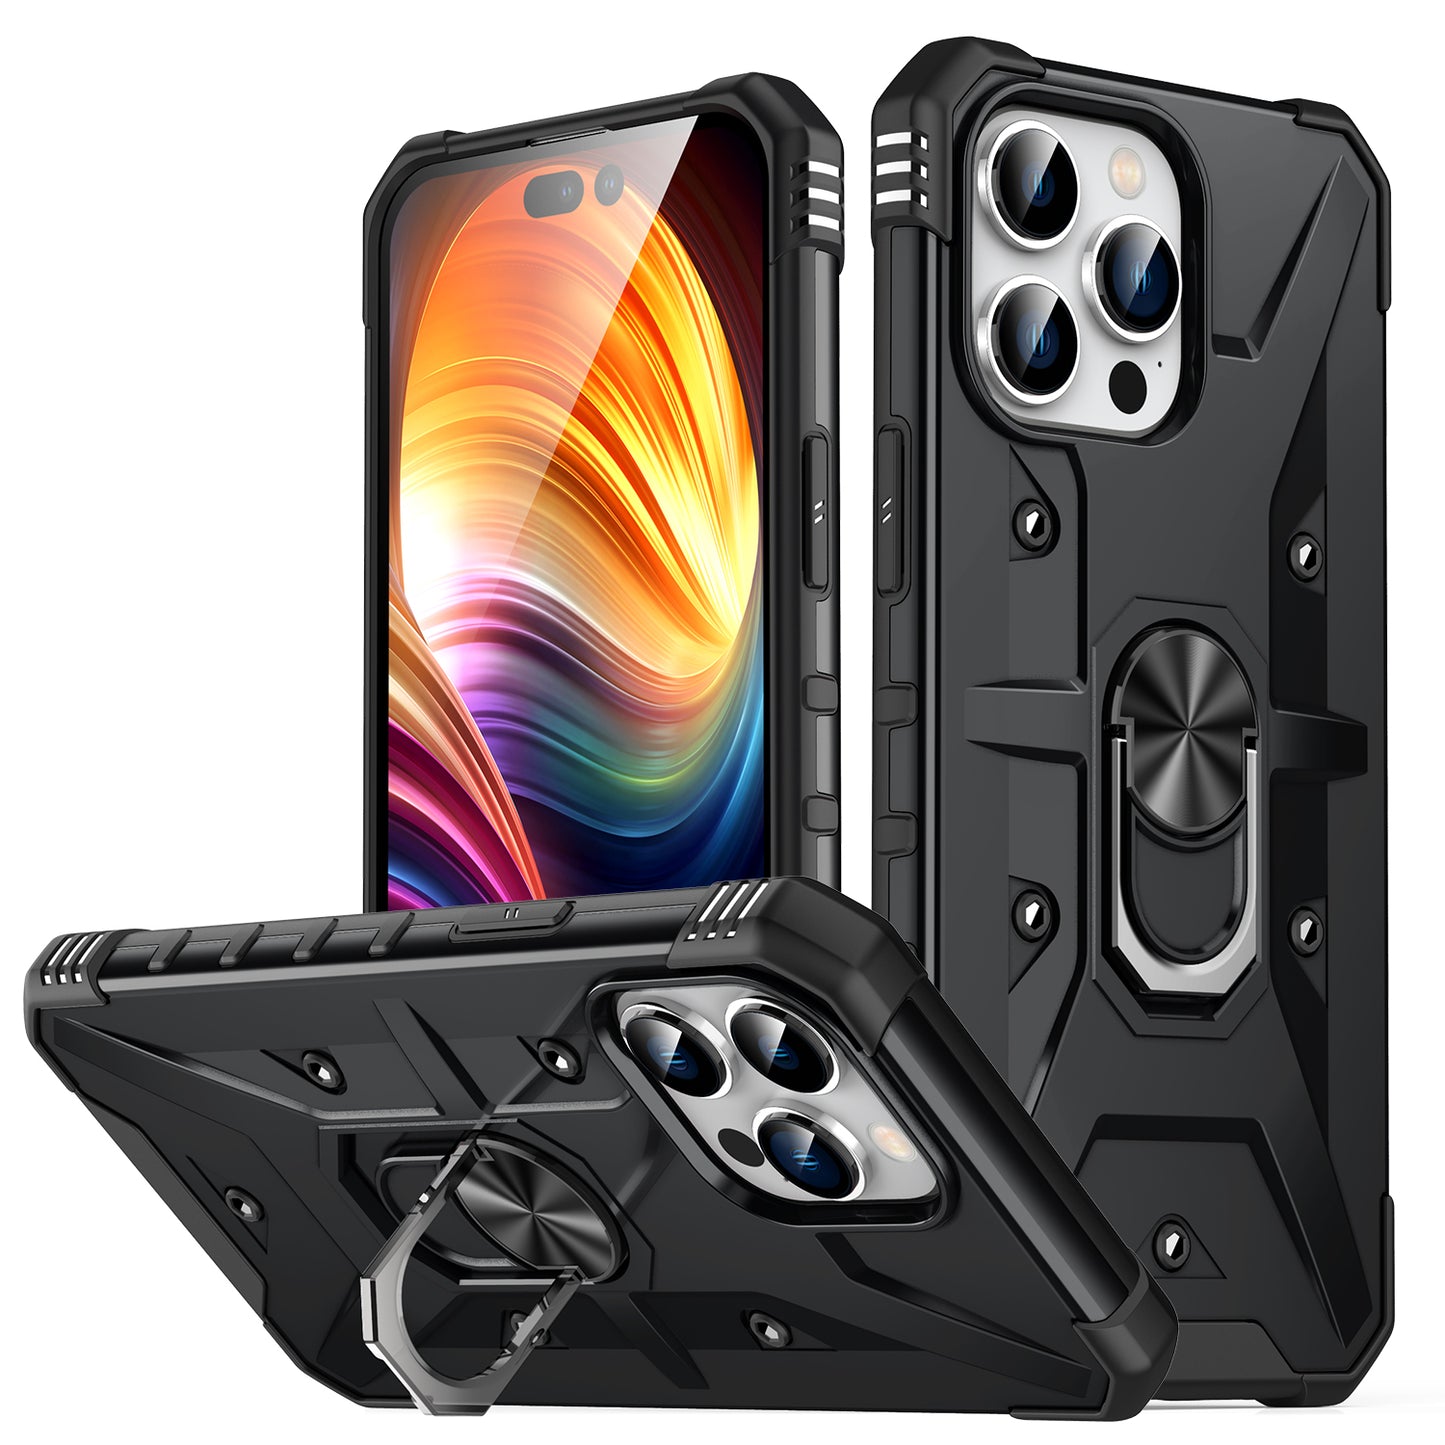 luxury armor case rugged skin heavy duty military shockproof kickstand cover for iphone 11 phone cover